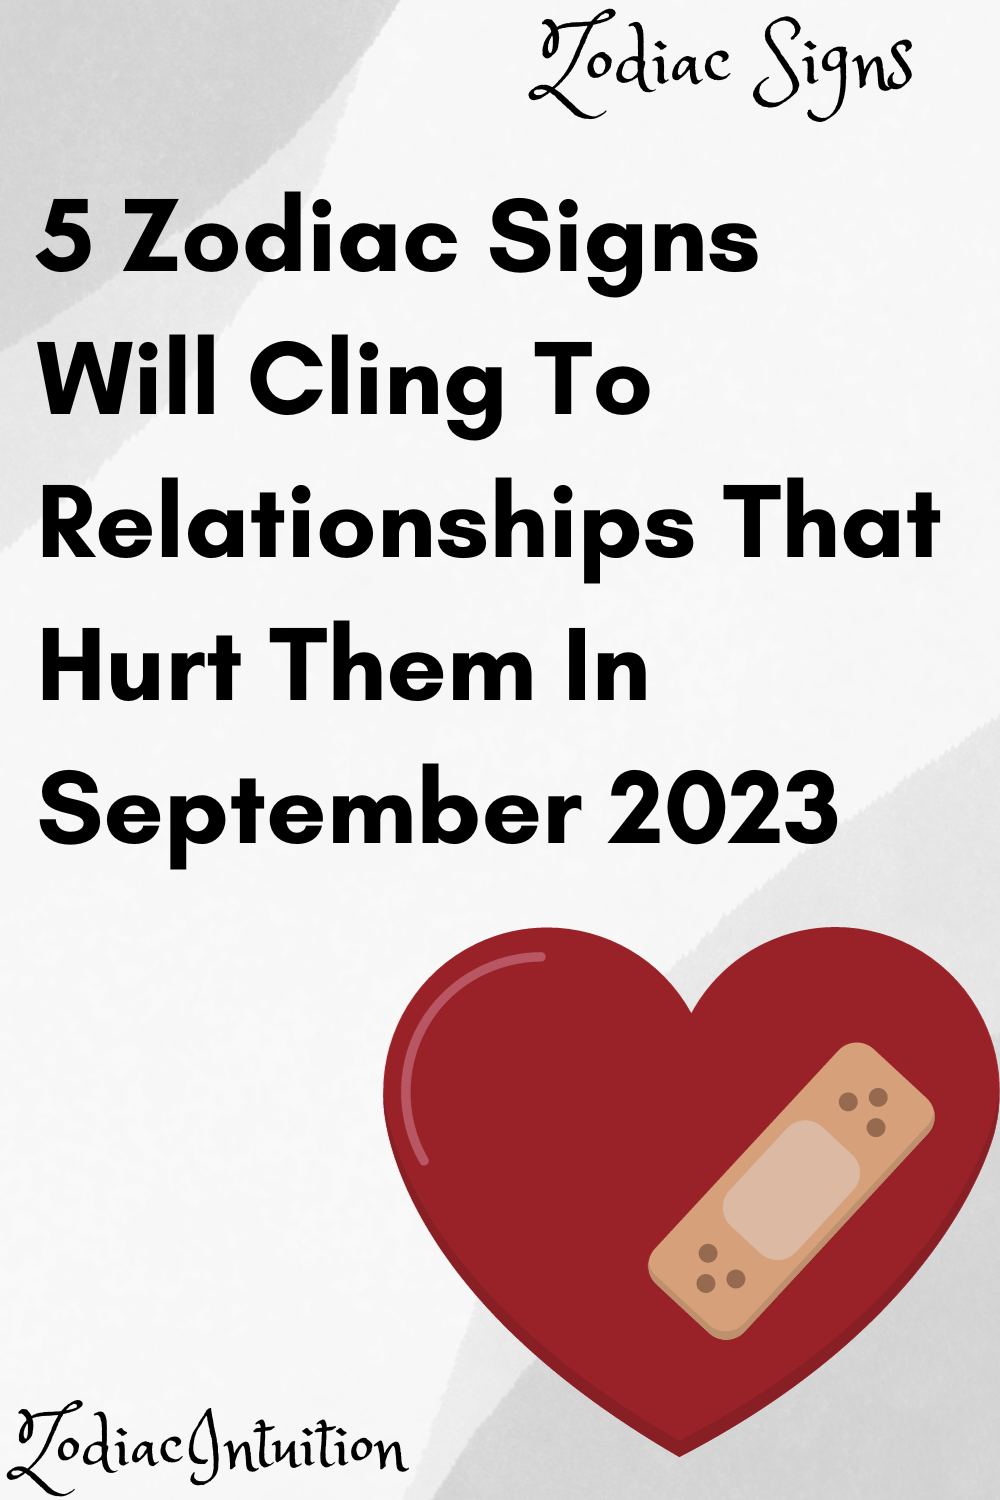 5 Zodiac Signs Will Cling To Relationships That Hurt Them In September 2023